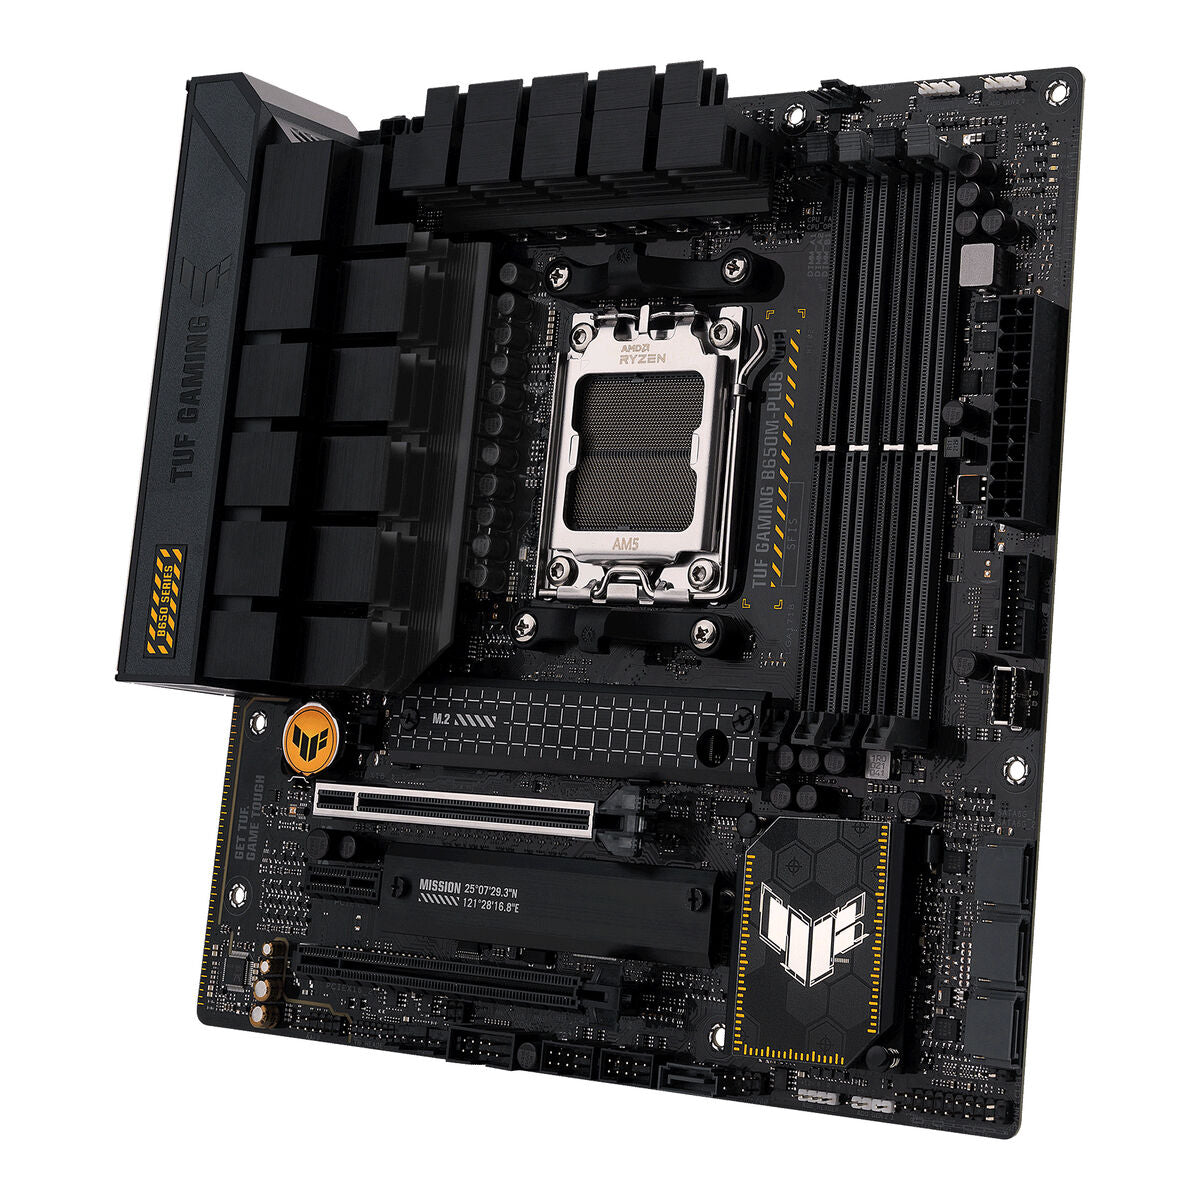 Motherboard Asus TUF GAMING B650M-PLUS WIFI AMD AM5 AMD B650, Asus, Computing, Components, motherboard-asus-tuf-gaming-b650m-plus-wifi-amd-am5-amd-b650, Brand_Asus, category-reference-2609, category-reference-2803, category-reference-2804, category-reference-t-19685, category-reference-t-19912, category-reference-t-21360, computers / components, Condition_NEW, Price_200 - 300, Teleworking, RiotNook